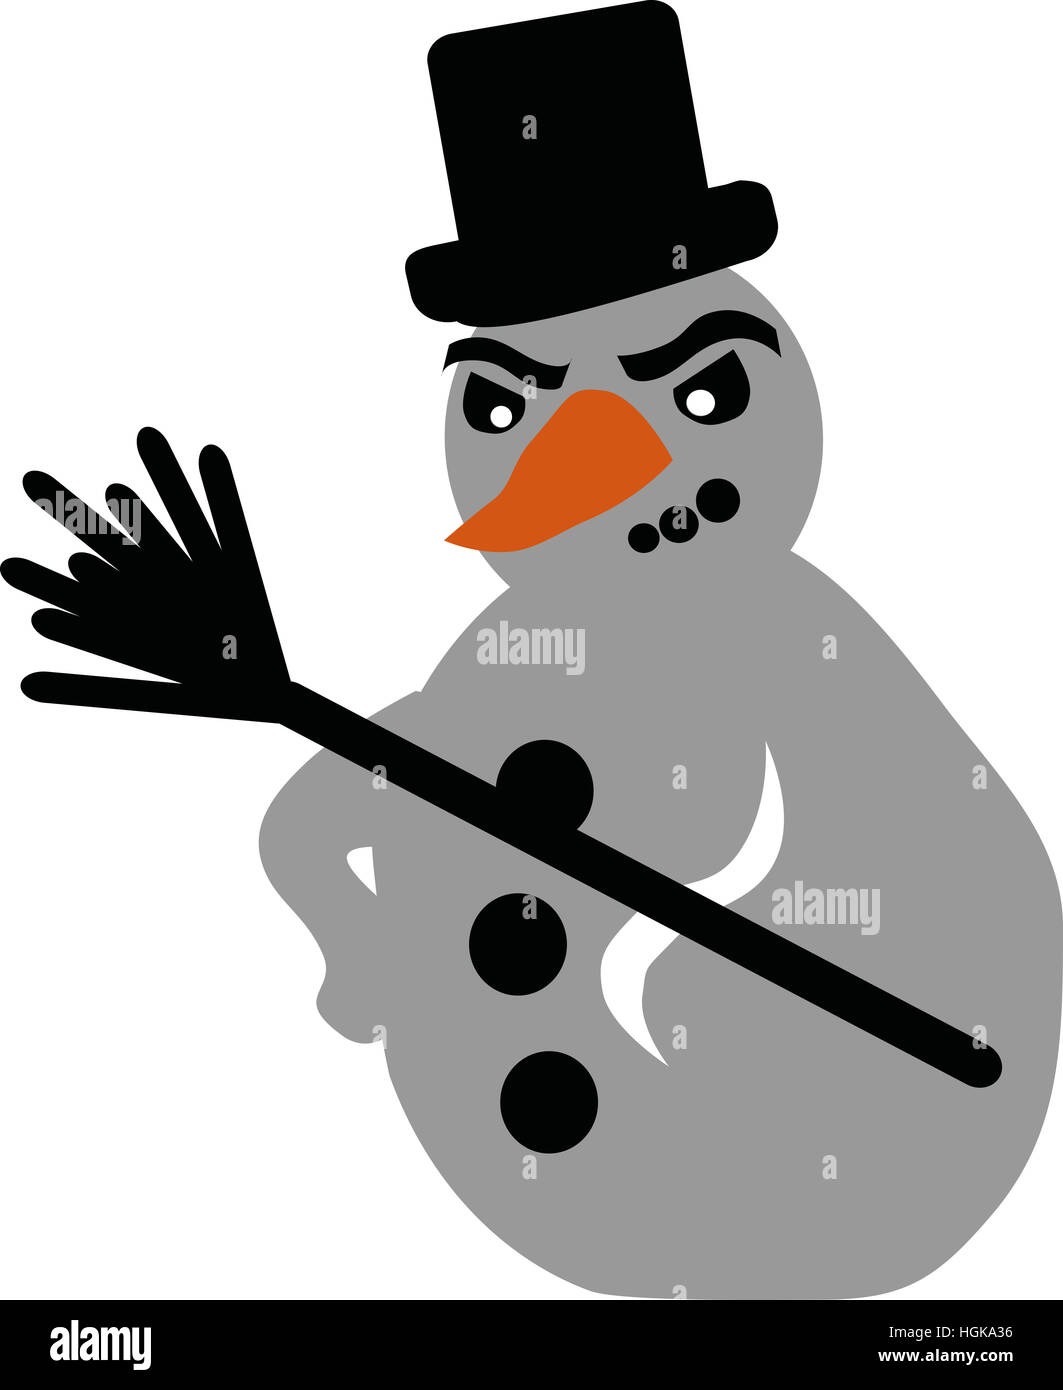 Bad angry snowman with broom Stock Photo